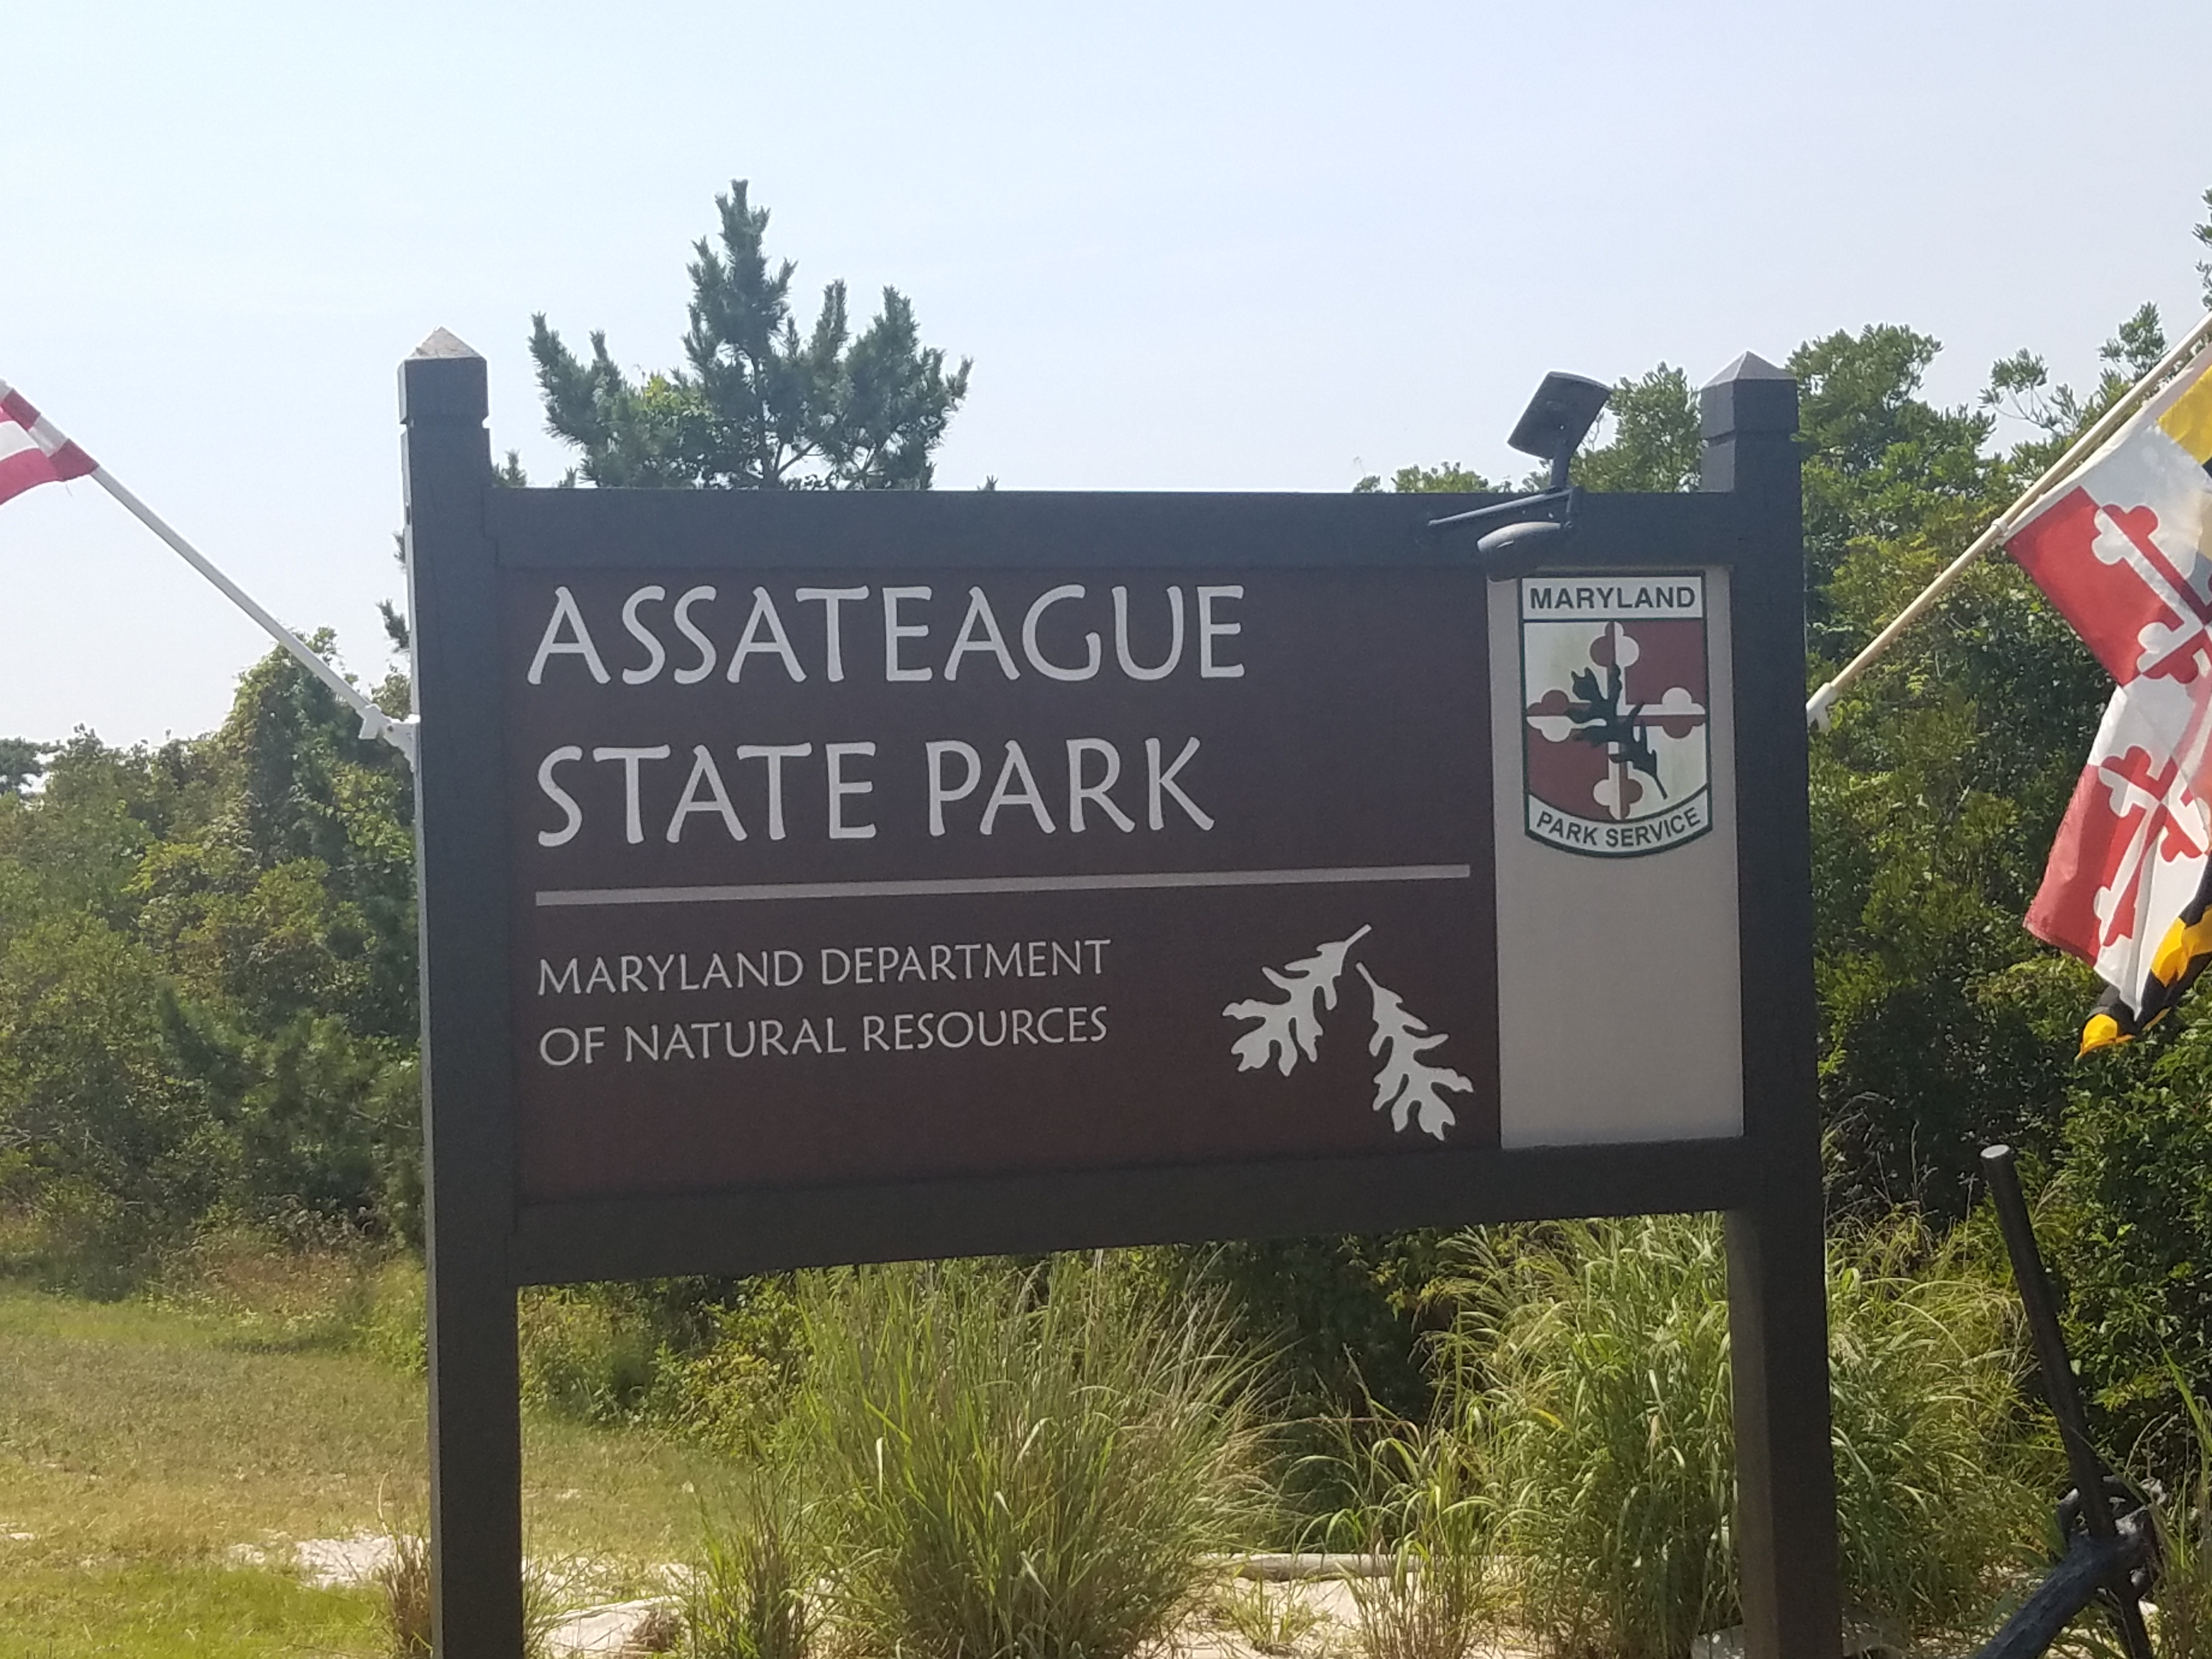 Assateague Island is known for the wild horses that roam the island. There is also enjoy swimming, camping, kayaking, paddle board, or wind surfing and more